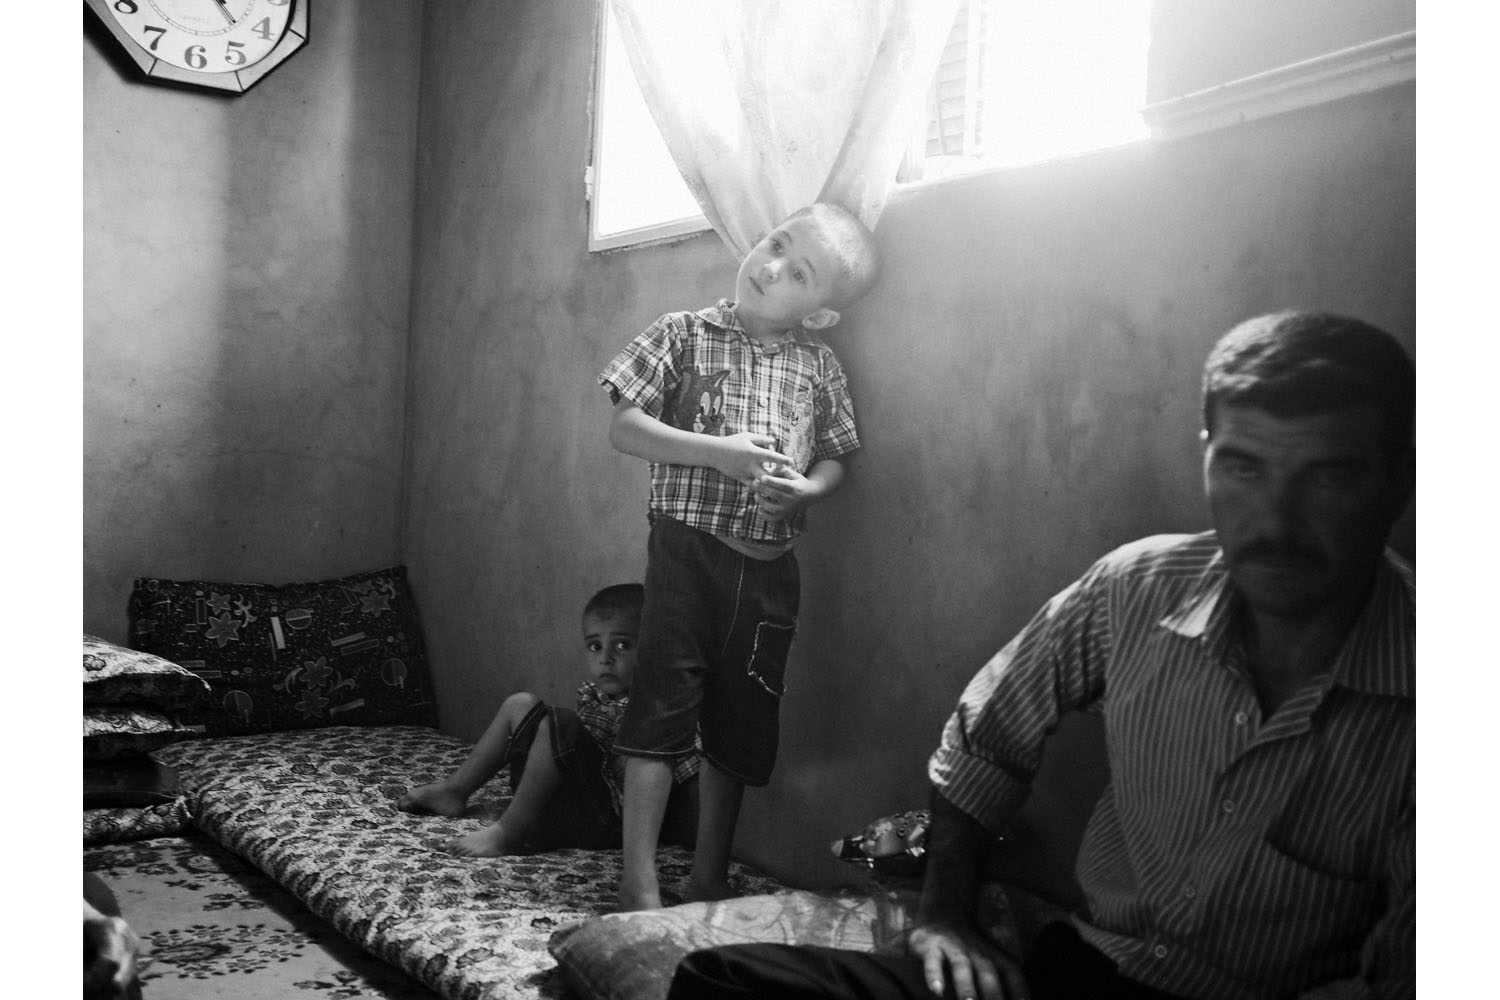 Bar-elias, Bekaa Valley, Lebanon. June 2013.6-year-old Mayar(center) with his brother and father inside their temporary home in the town of Bar-elias, Lebanon. The family is from Qusair, Syria.(Photo by Moises Saman/MAGNUM)